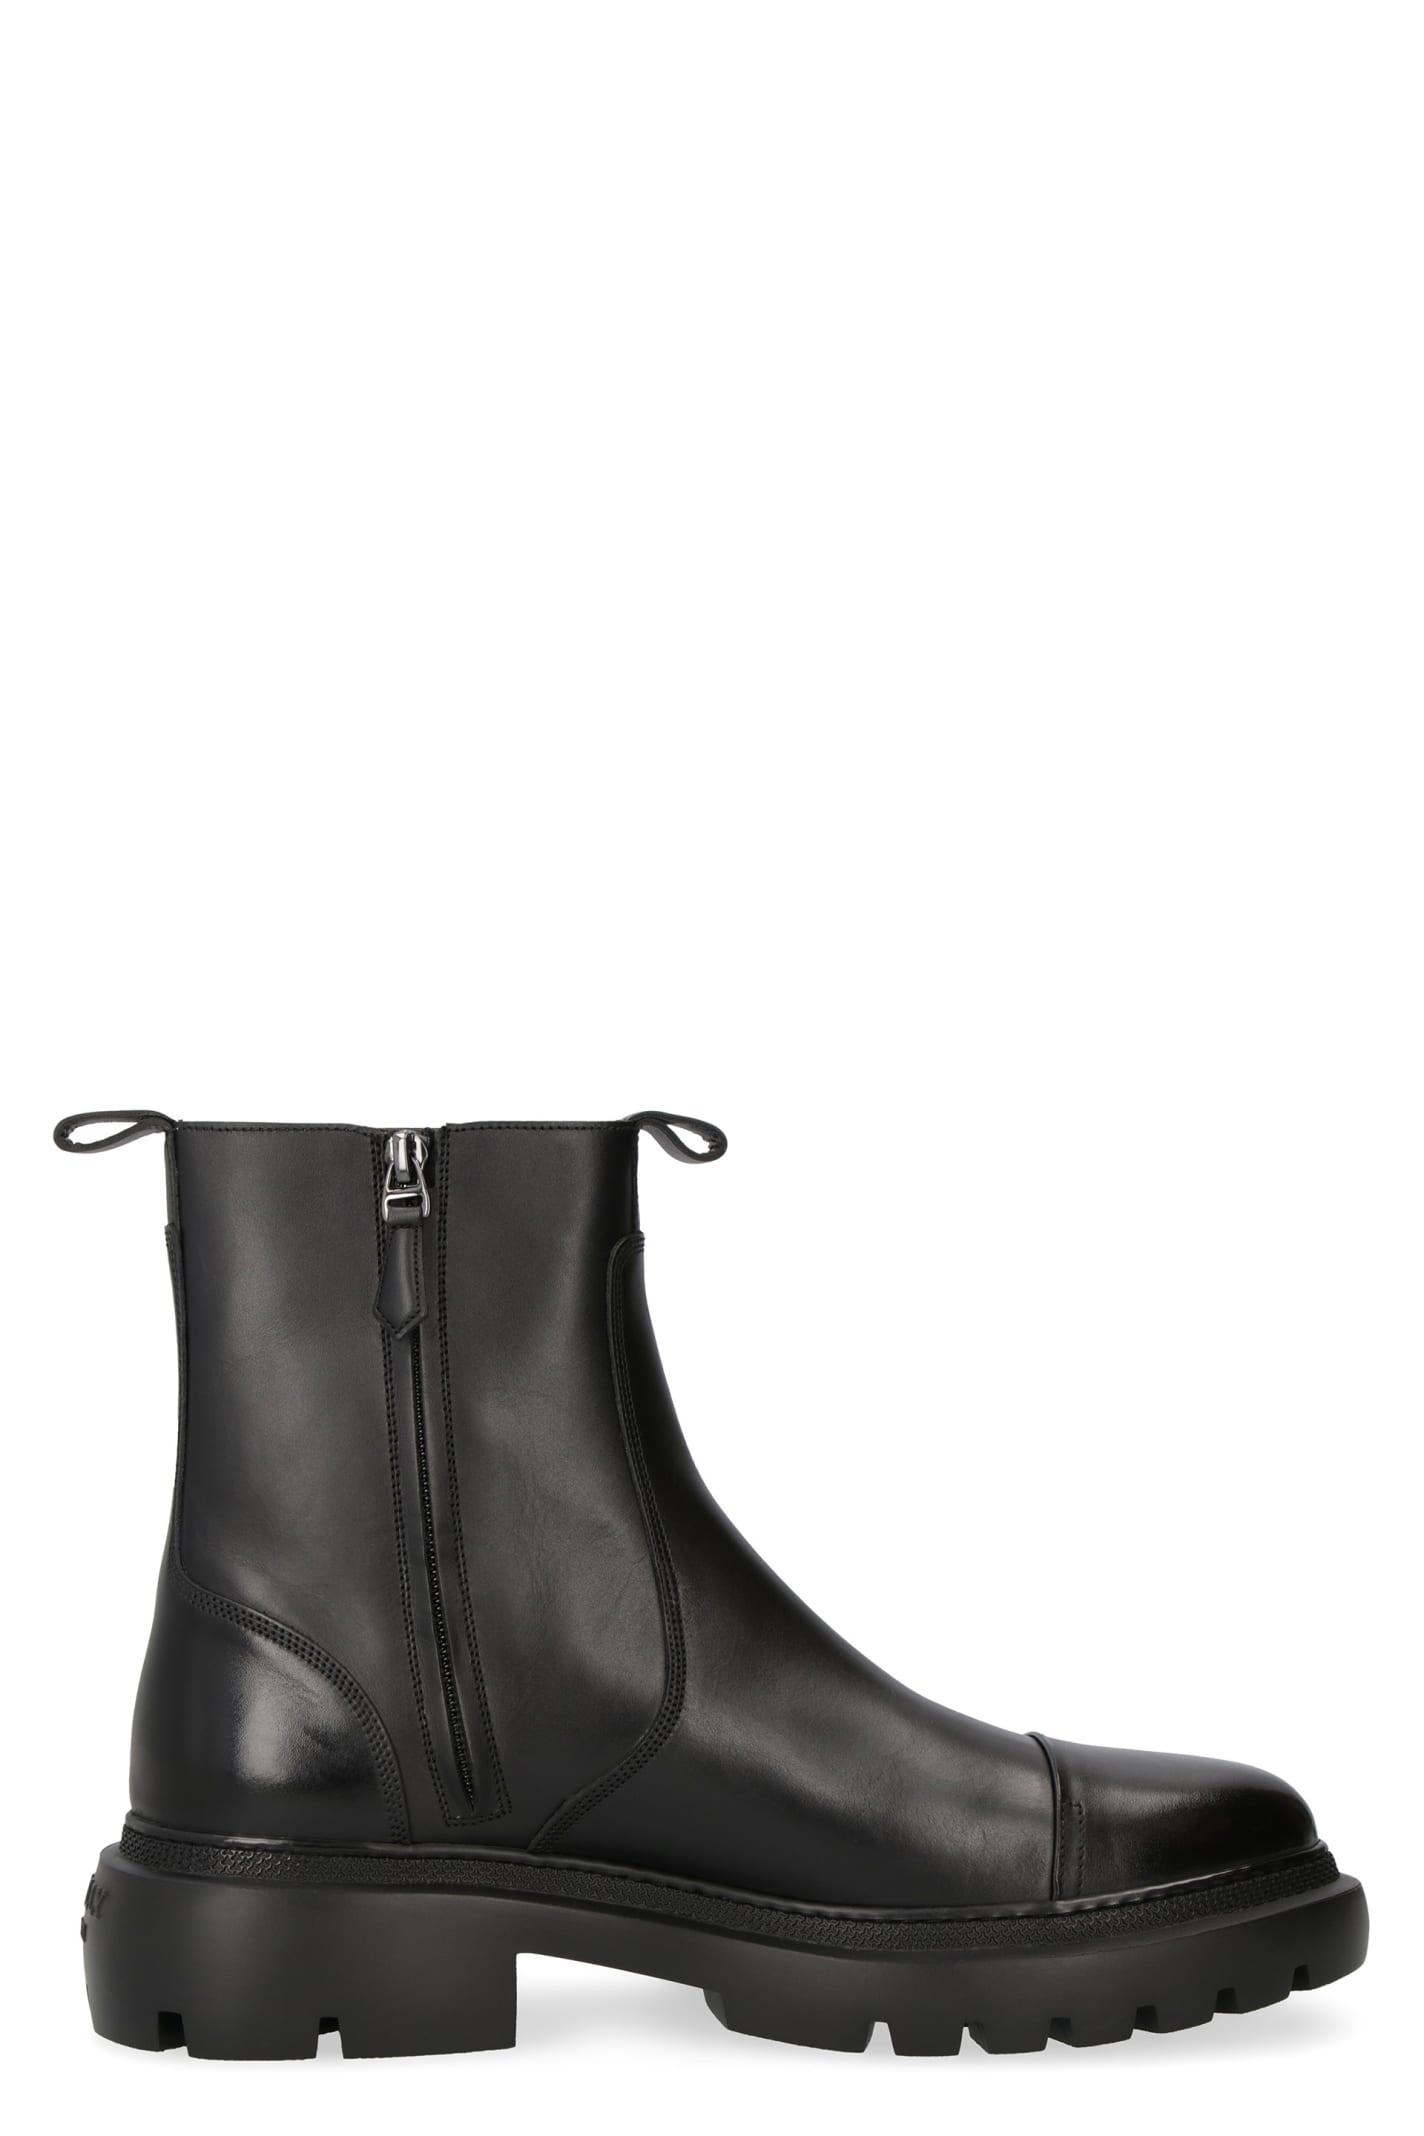 Bally Vaughen Leather Ankle Boots